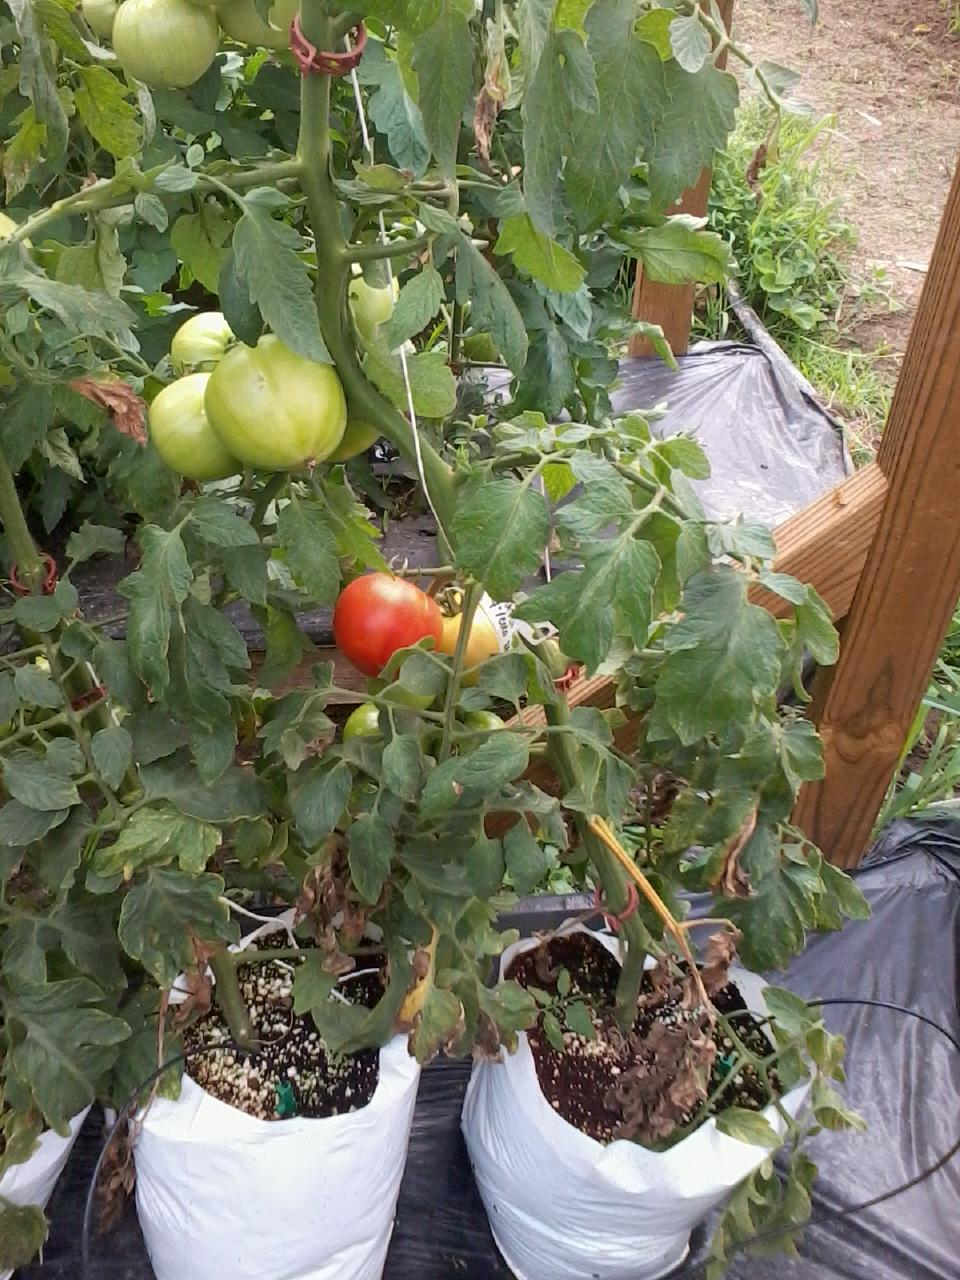 Objective To determine whether hydroponically grown tomatoes provide a more